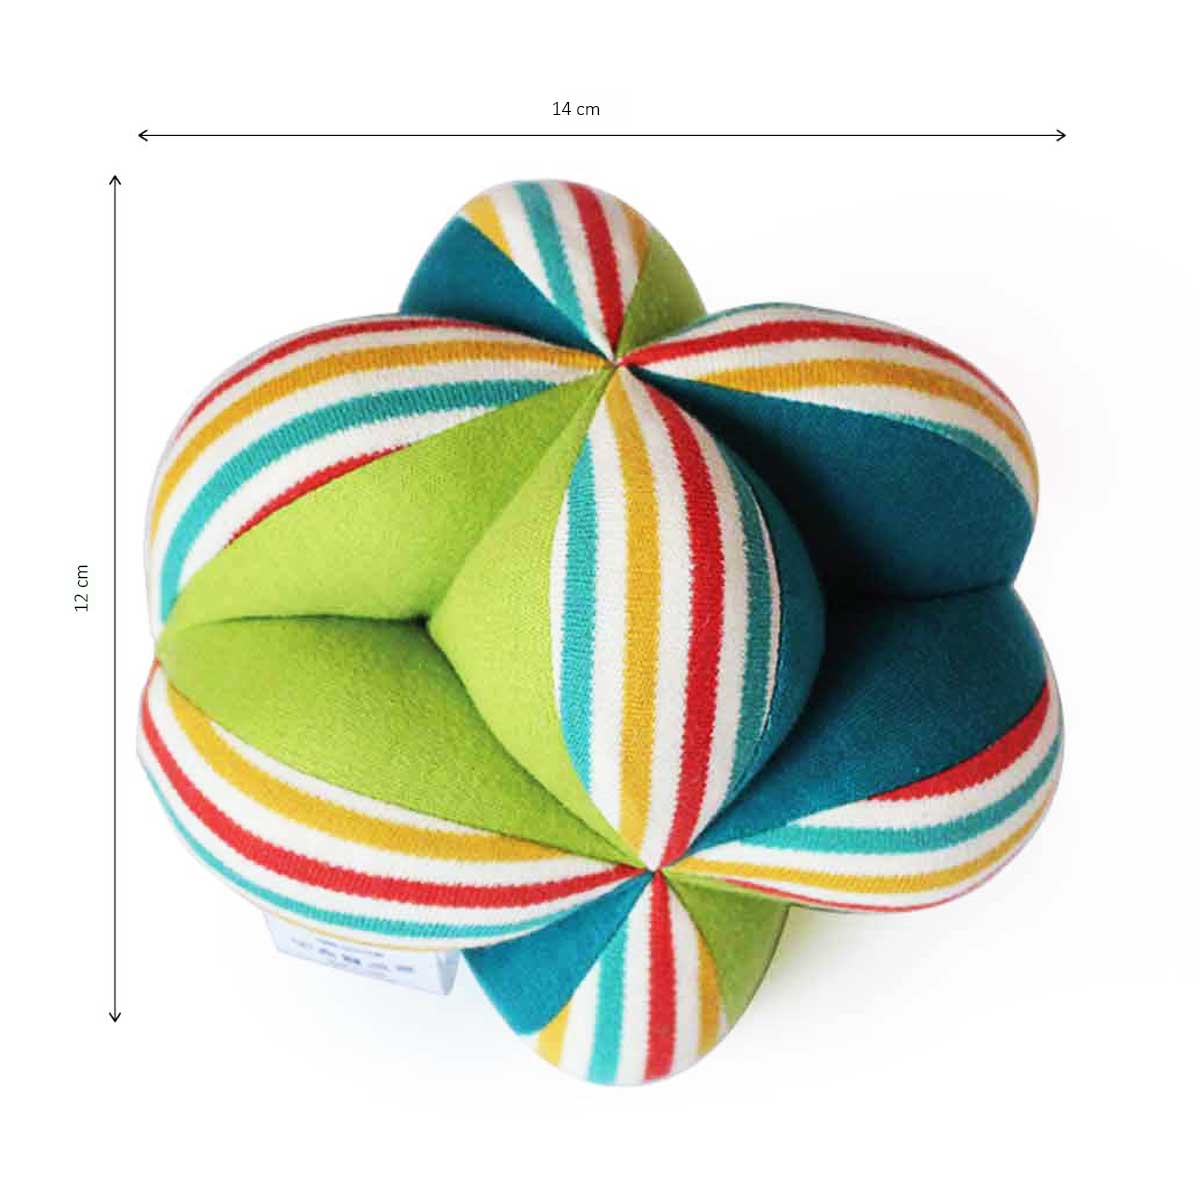 Shumee Colorful Clutch Ball For Babies - EXP-IN-IHD-CCB-C-6mo-0081